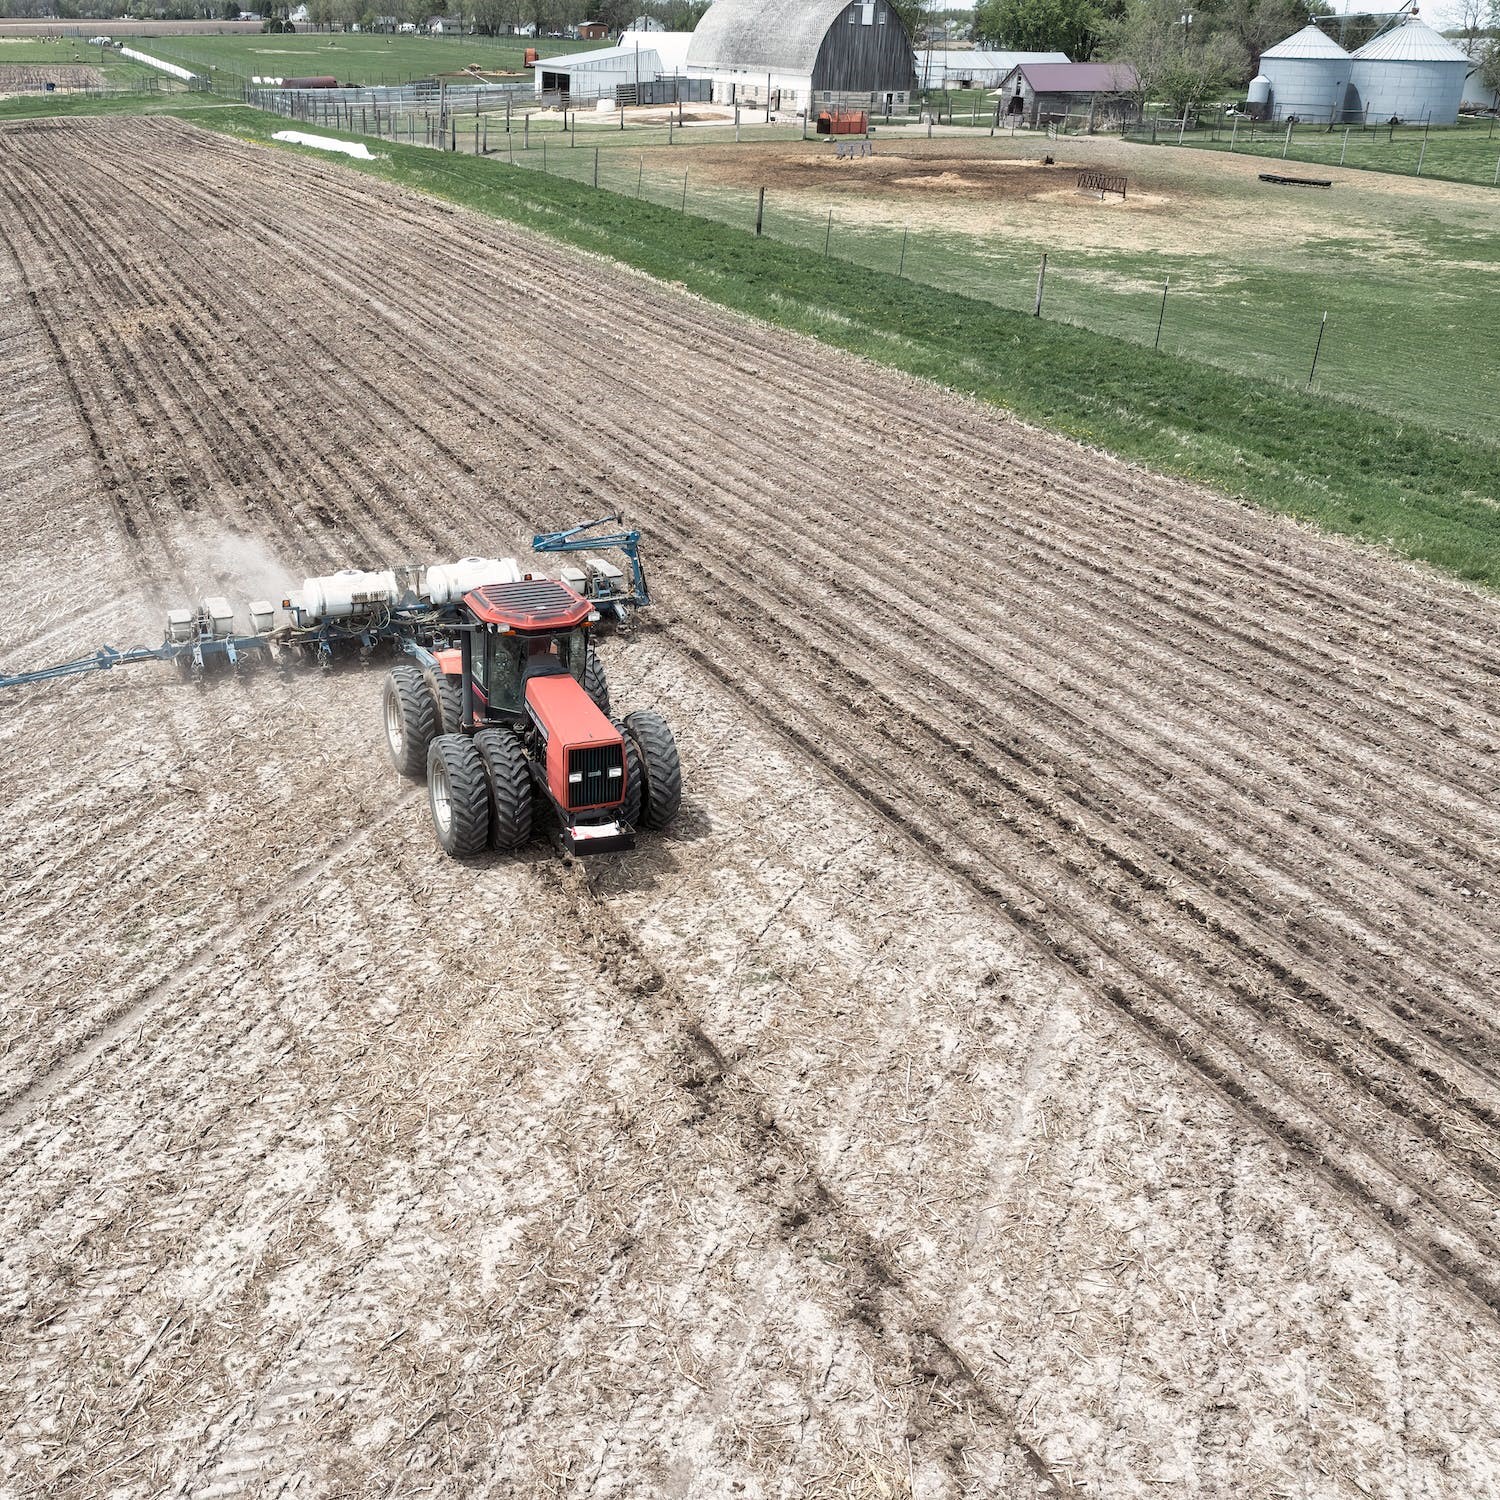 Best Rotary Tiller for Tractor Review & Buying Guide